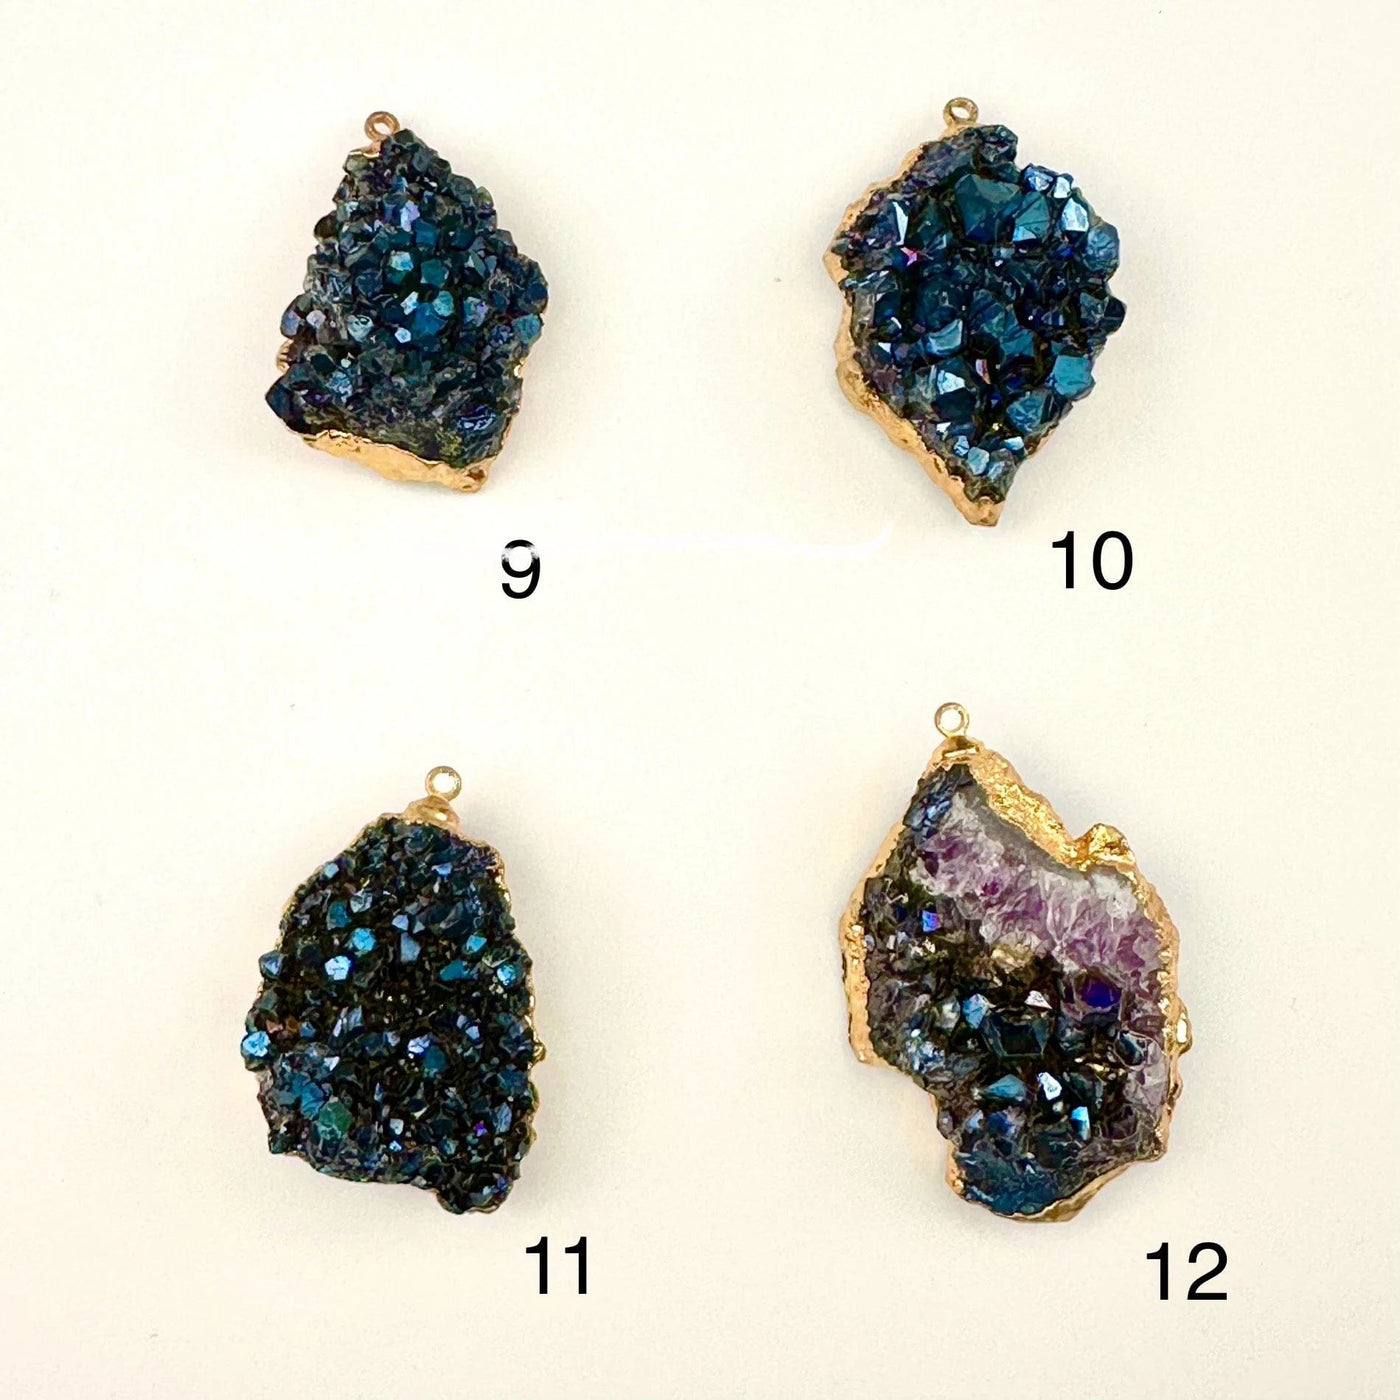 Mystic Blue Titanium Crystal Cluster Gold Plated Pendant - You Choose pendants 9 10 11 12 labeled